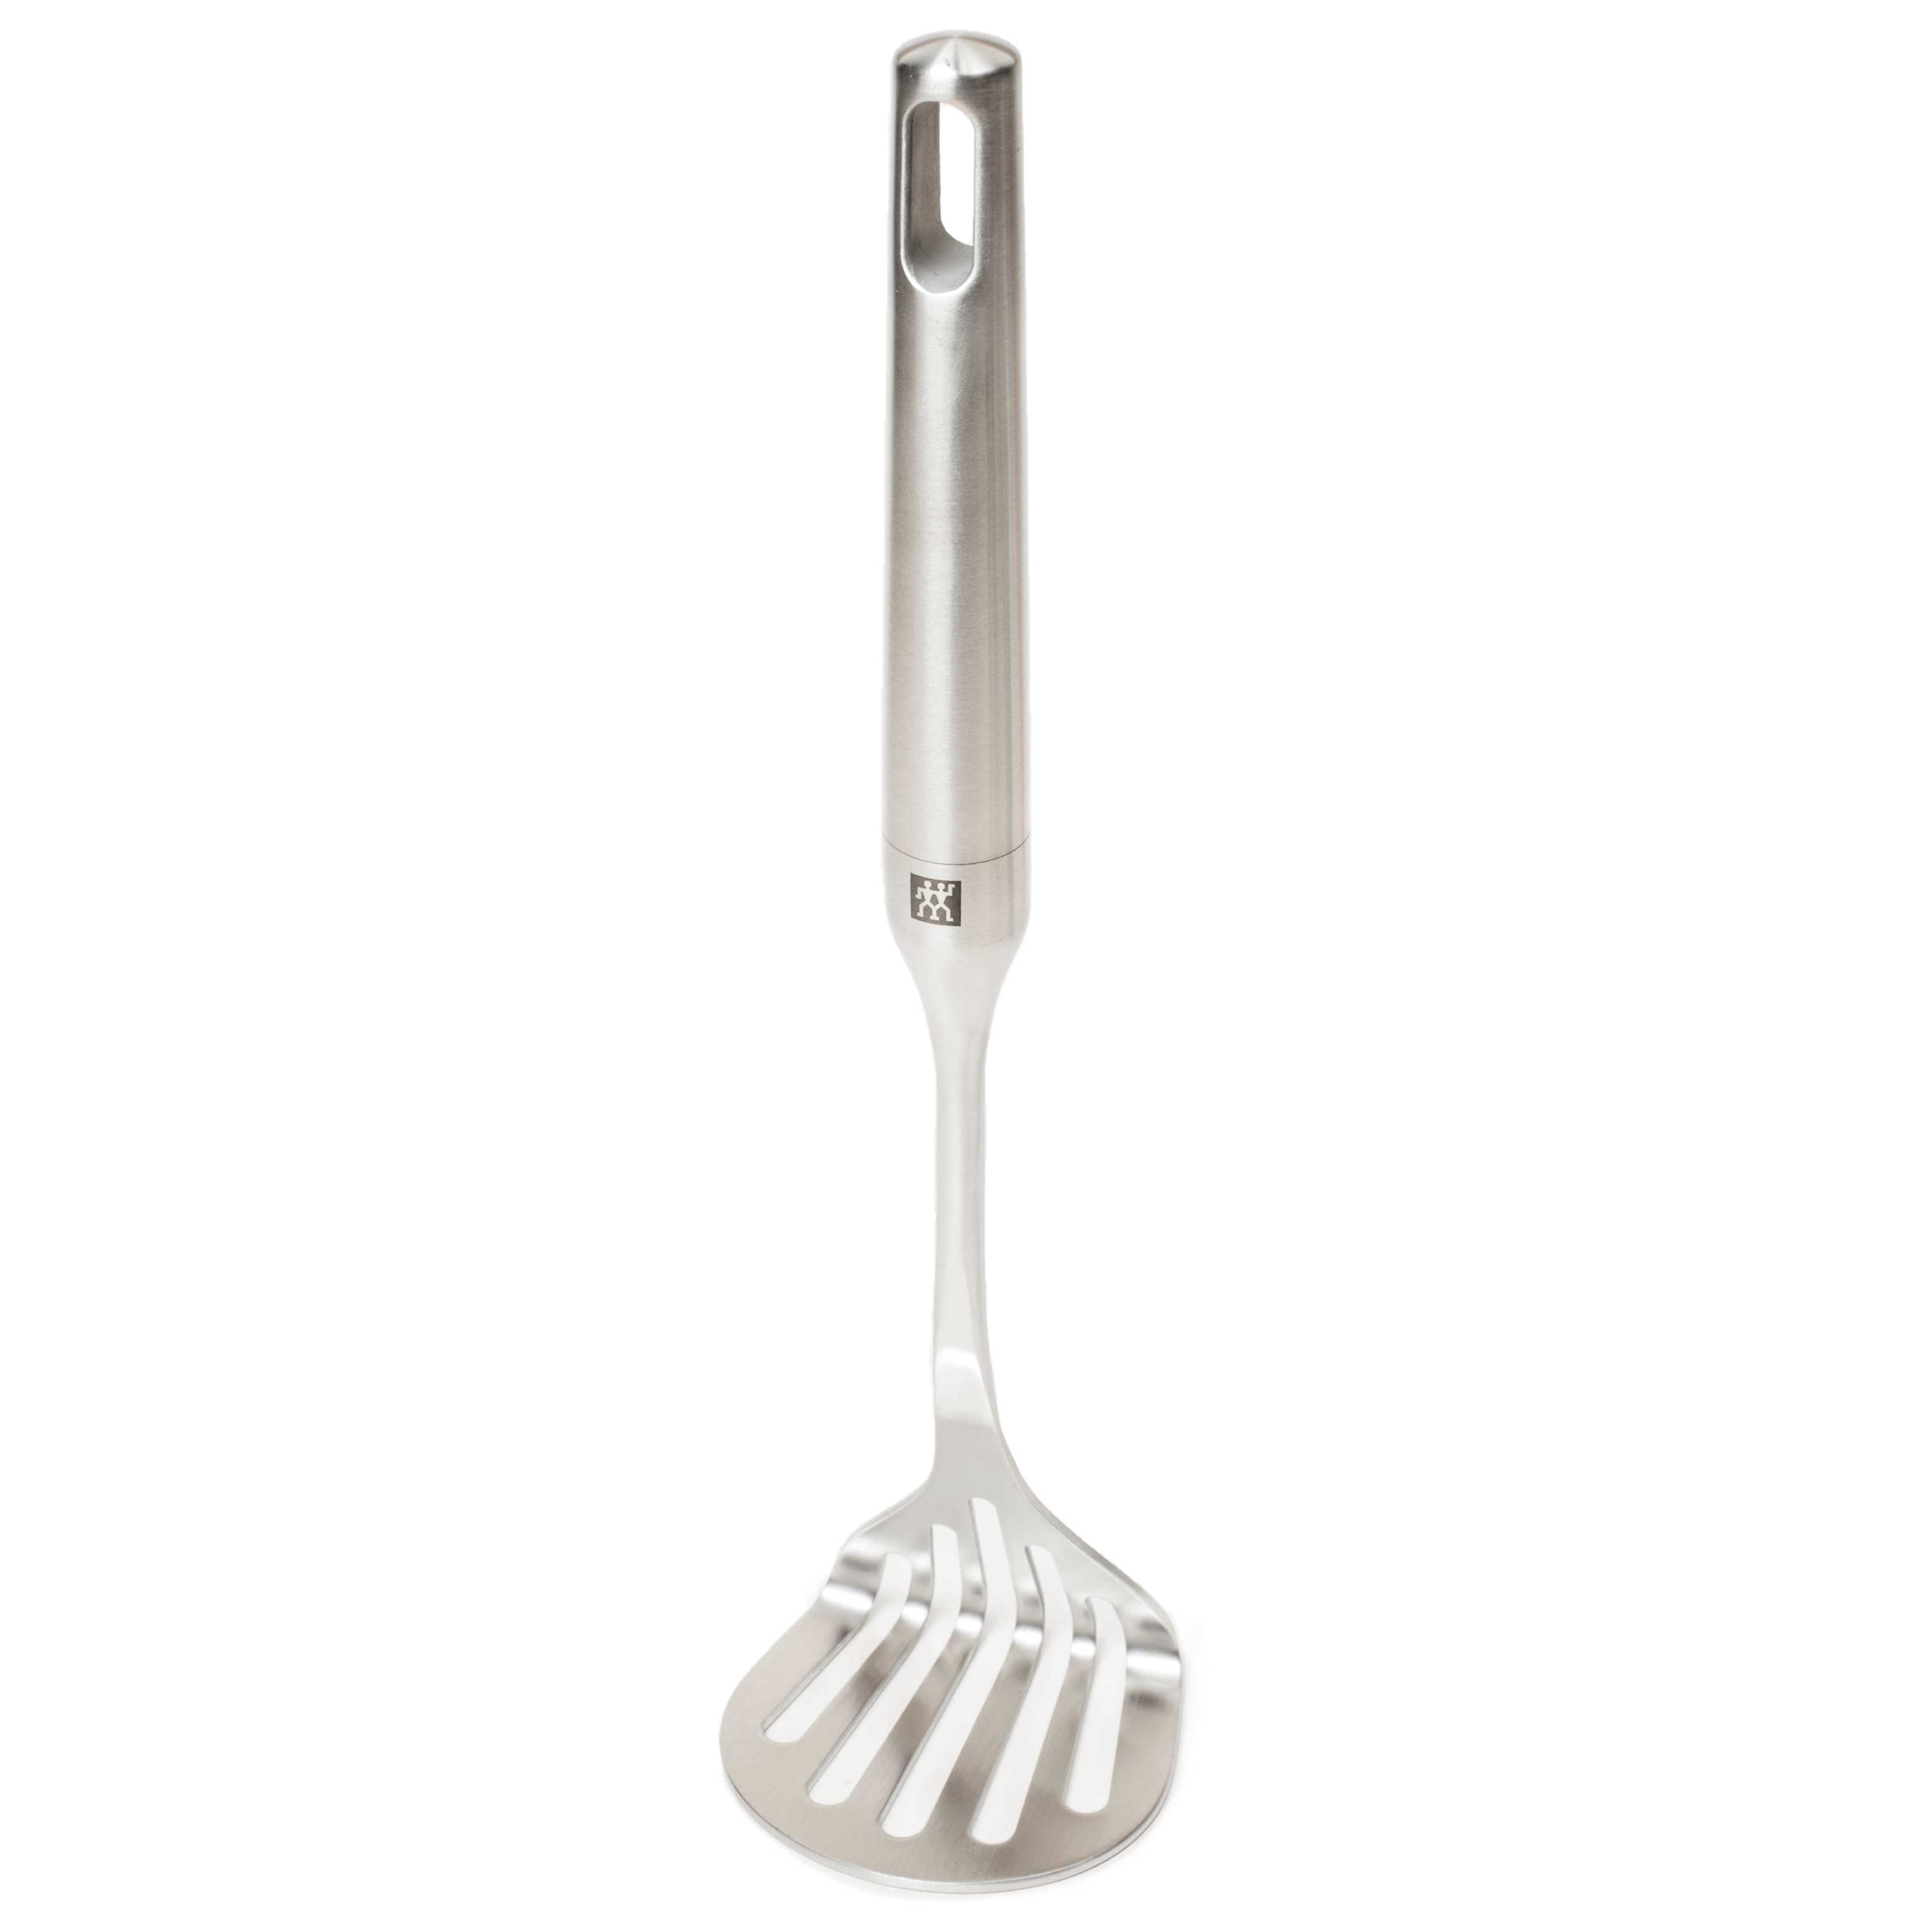 https://res.cloudinary.com/hksqkdlah/image/upload/31919_sil-potato-mashers-zwilling-twin-pure-stainless-steel-potato-masher-37521-000.png